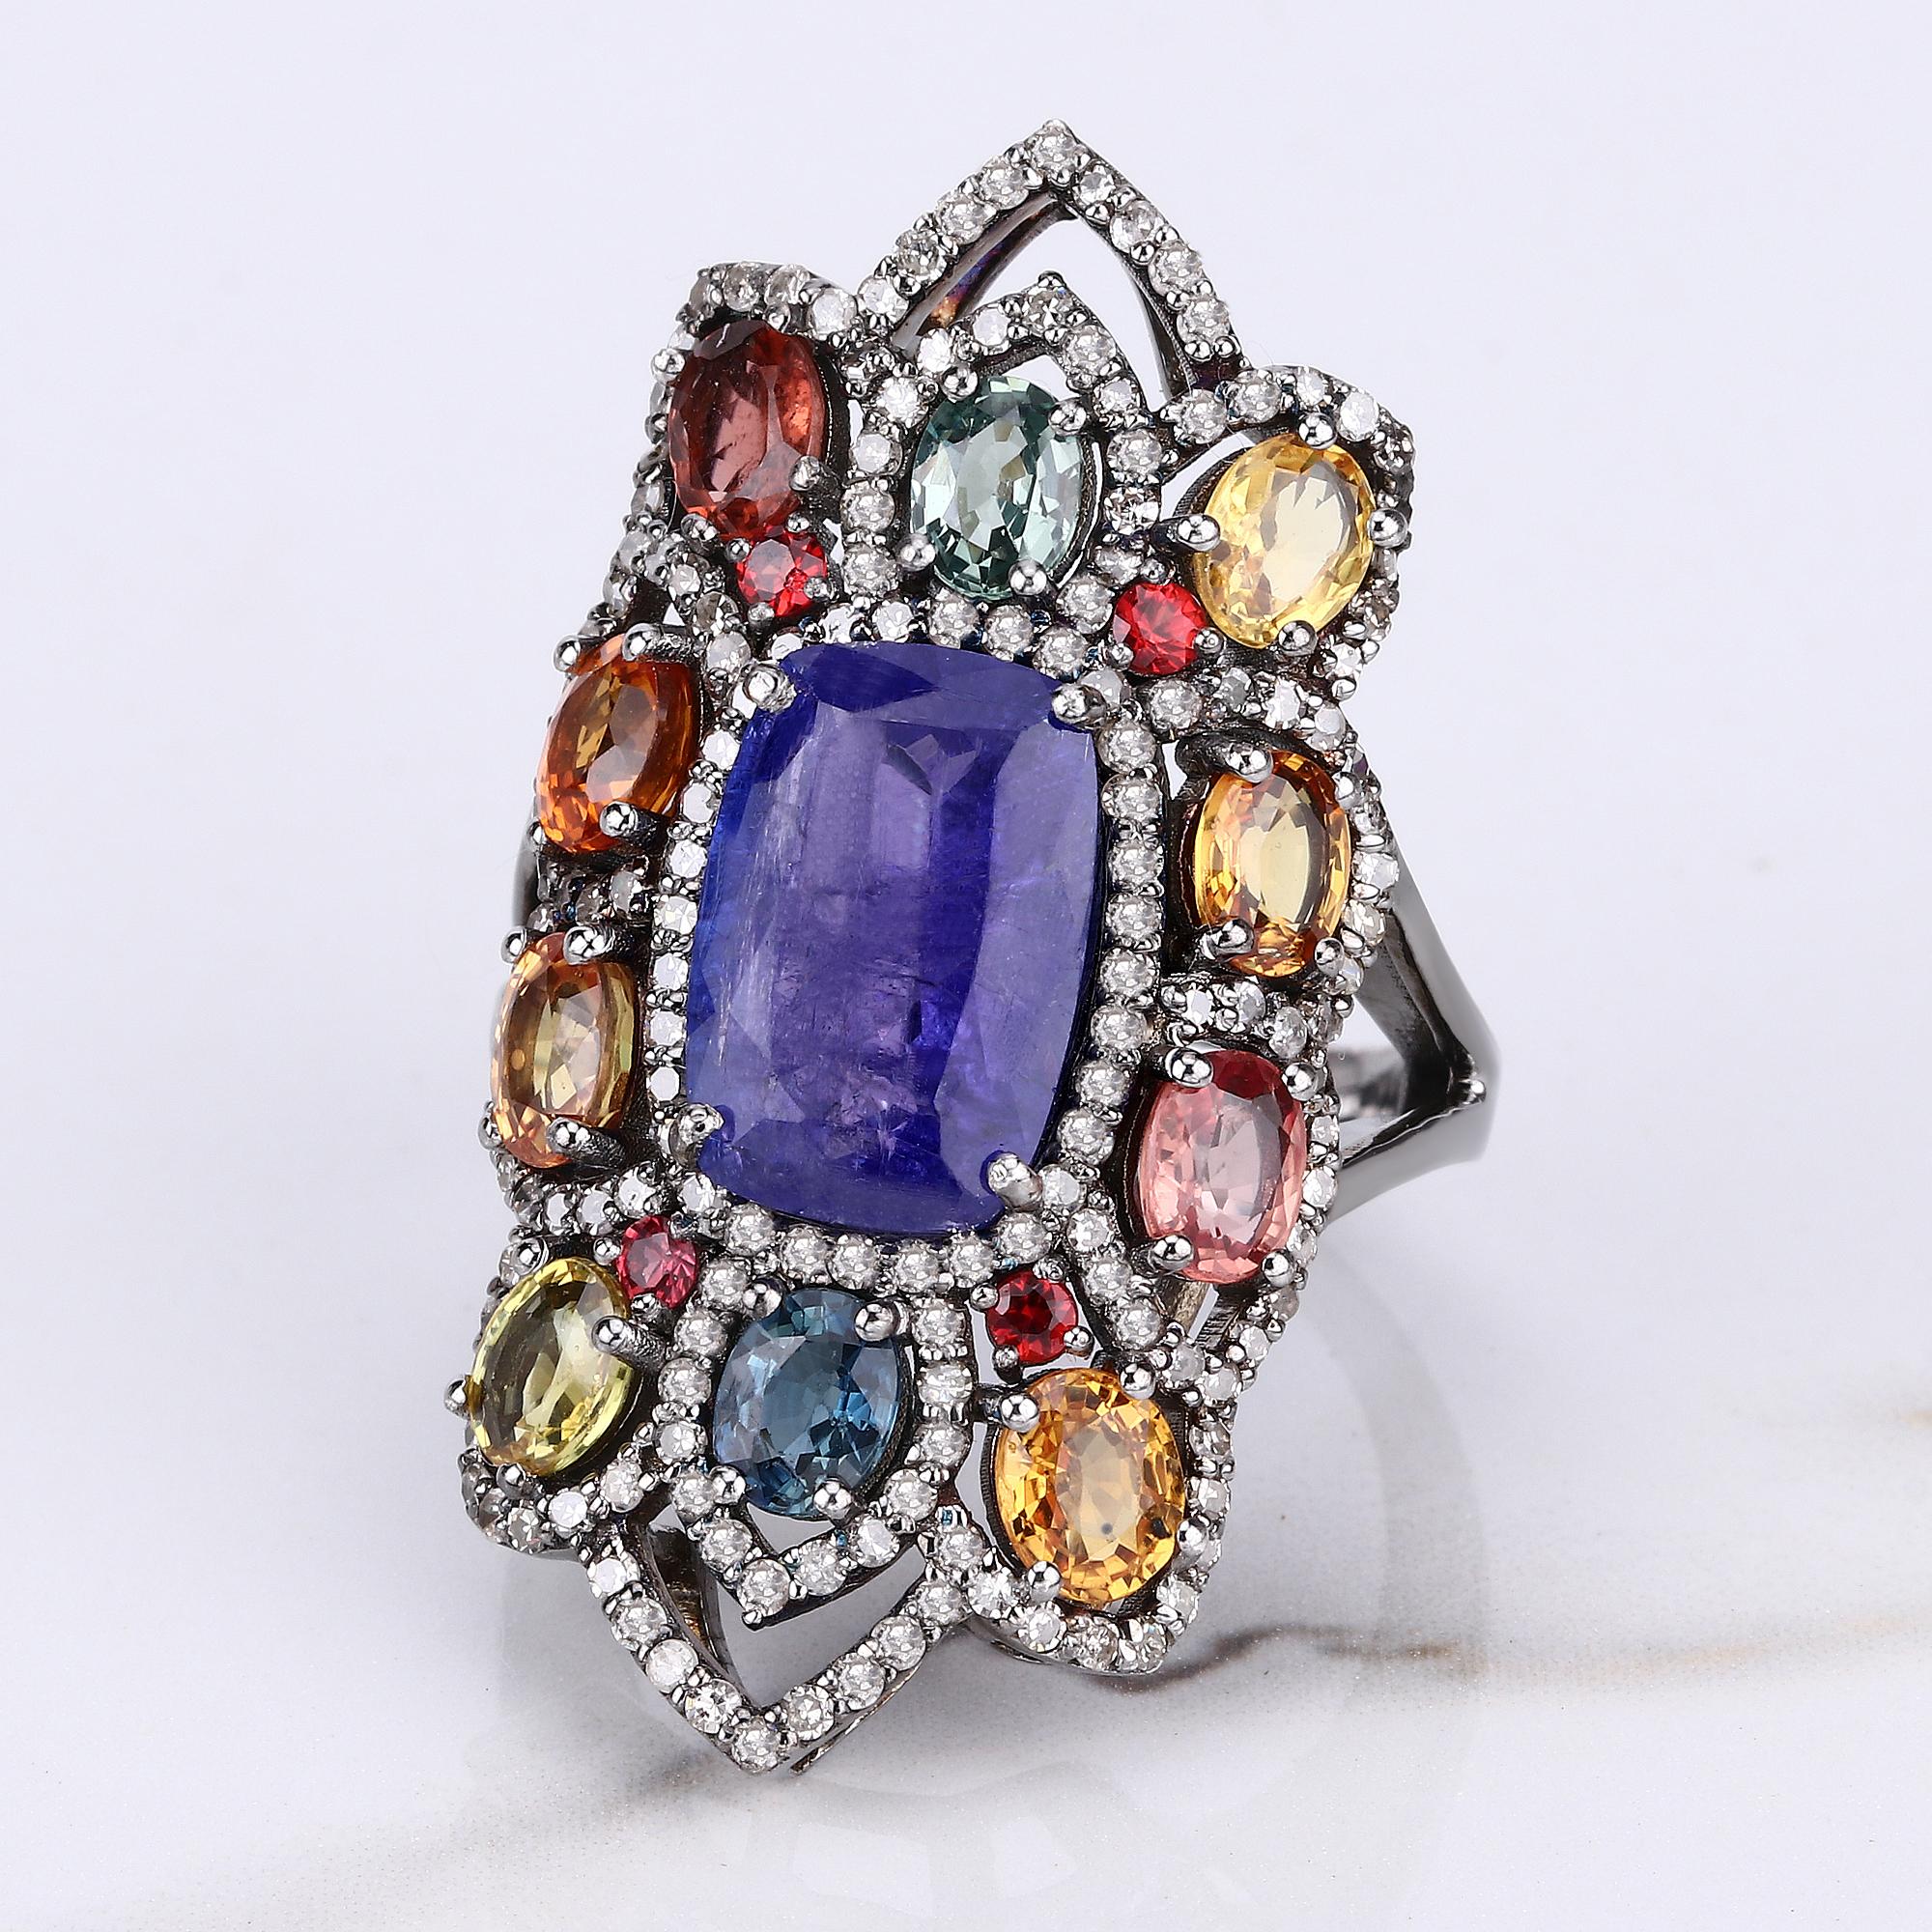 10.27cttw Tanzanite, Multi-Sapphires with Diamonds 1.18cttw Sterling Silver Ring

Vivid colors give this ring a powerful and dramatic presence. A richly-hued opaque tanzanite cushion-cut and multi-sapphires totaling 10.27 carats is haloed by 1.18